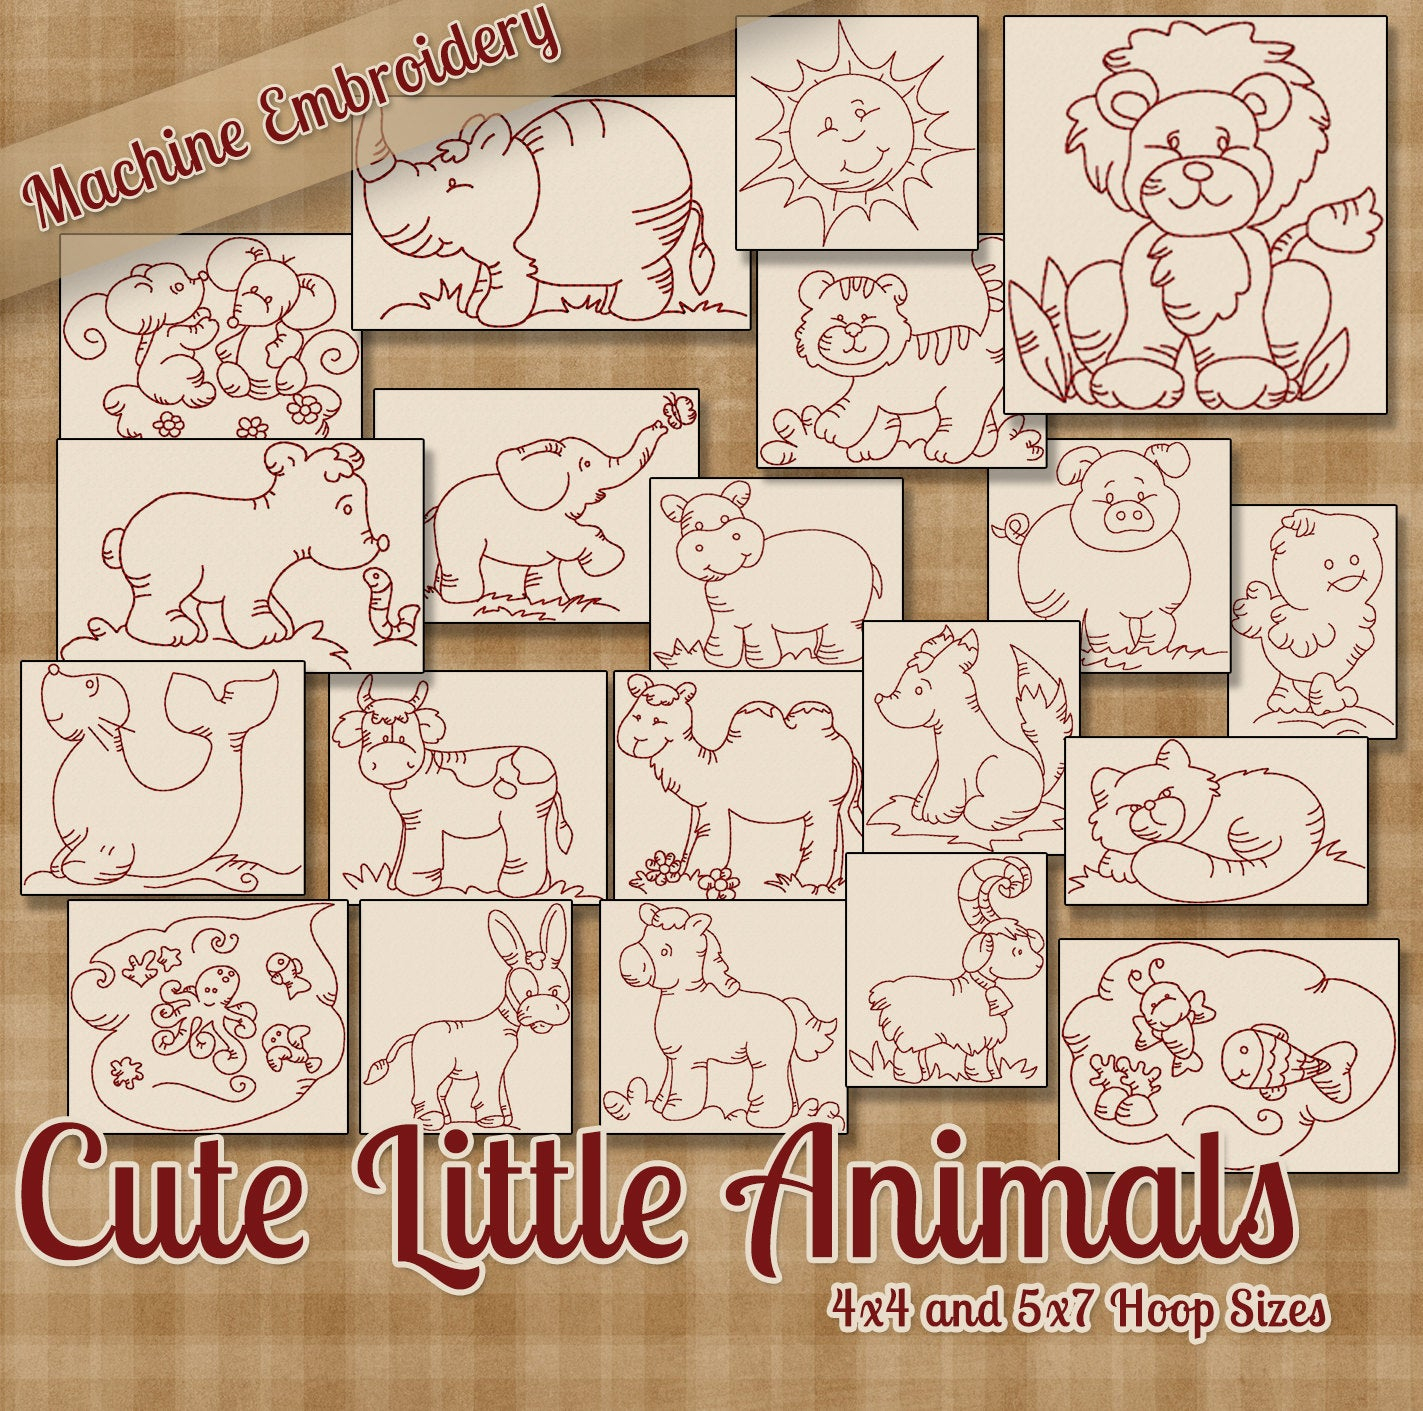 Free Redwork Embroidery Patterns Cute Little Animals Machine Embroidery Patterns Redwork Designs 20 Designs Instant Download Dst Hus Jef Pes Sew Vip Xxx